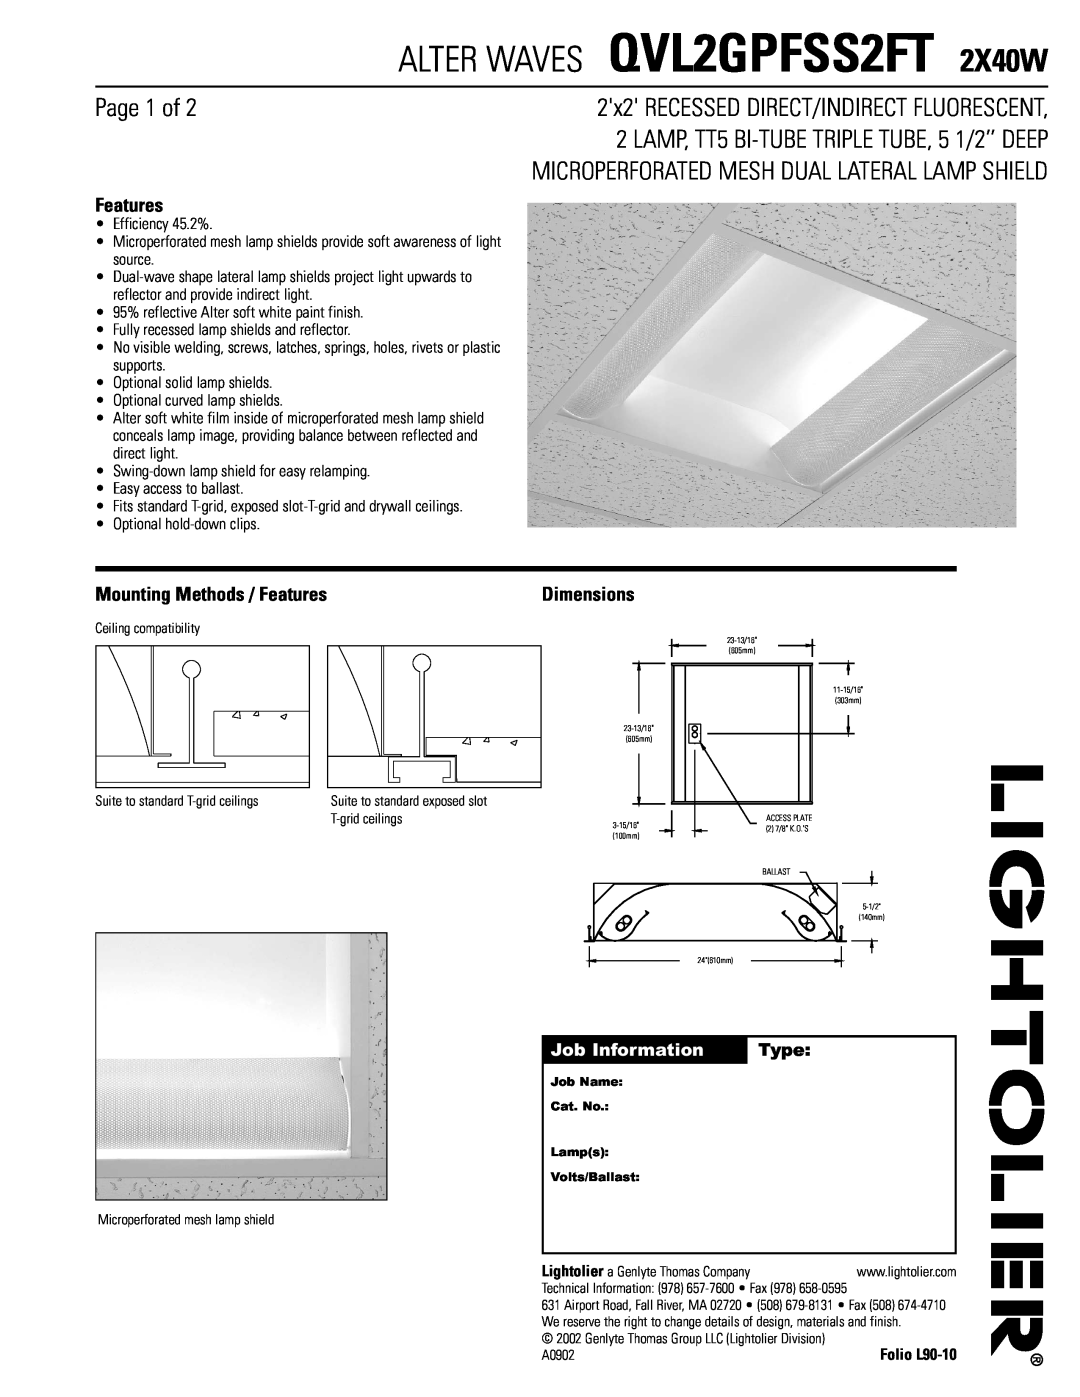 Lightolier QVL2GPFSS2FT 2X40W dimensions Page 1 of, Microperforated Mesh Dual Lateral Lamp Shield, Features, Dimensions 